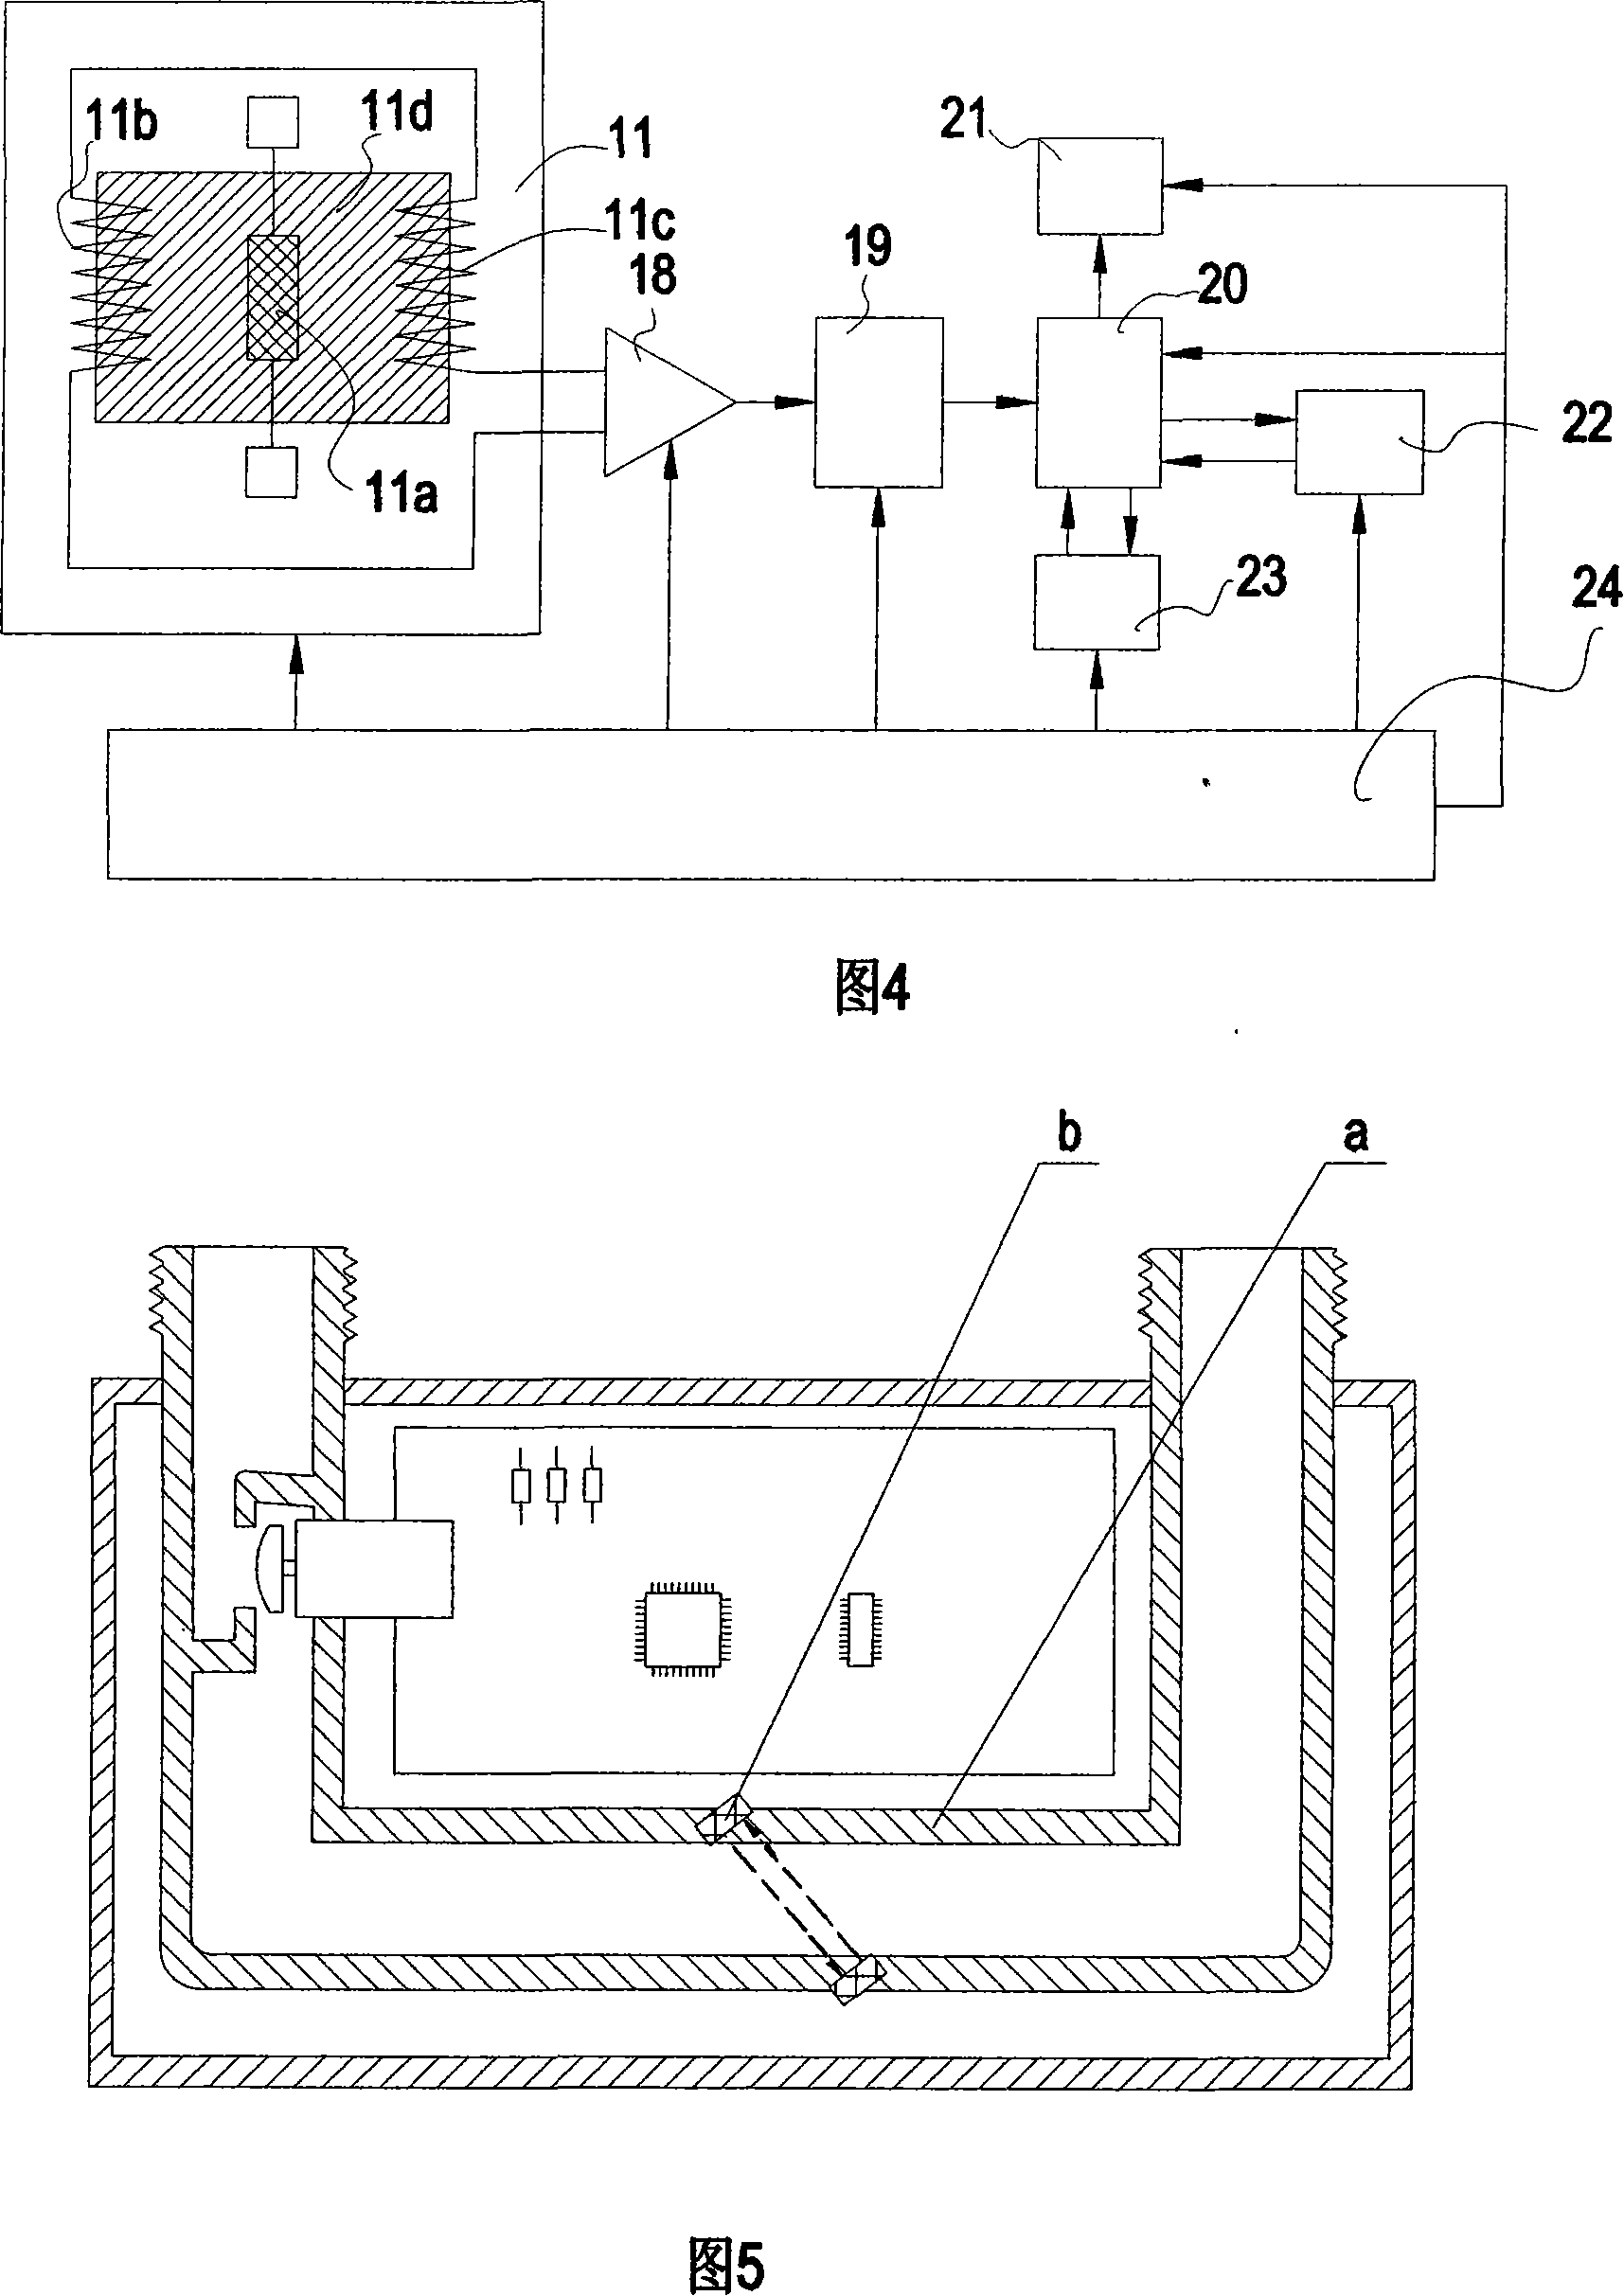 Electronic gas meter for mass and flow